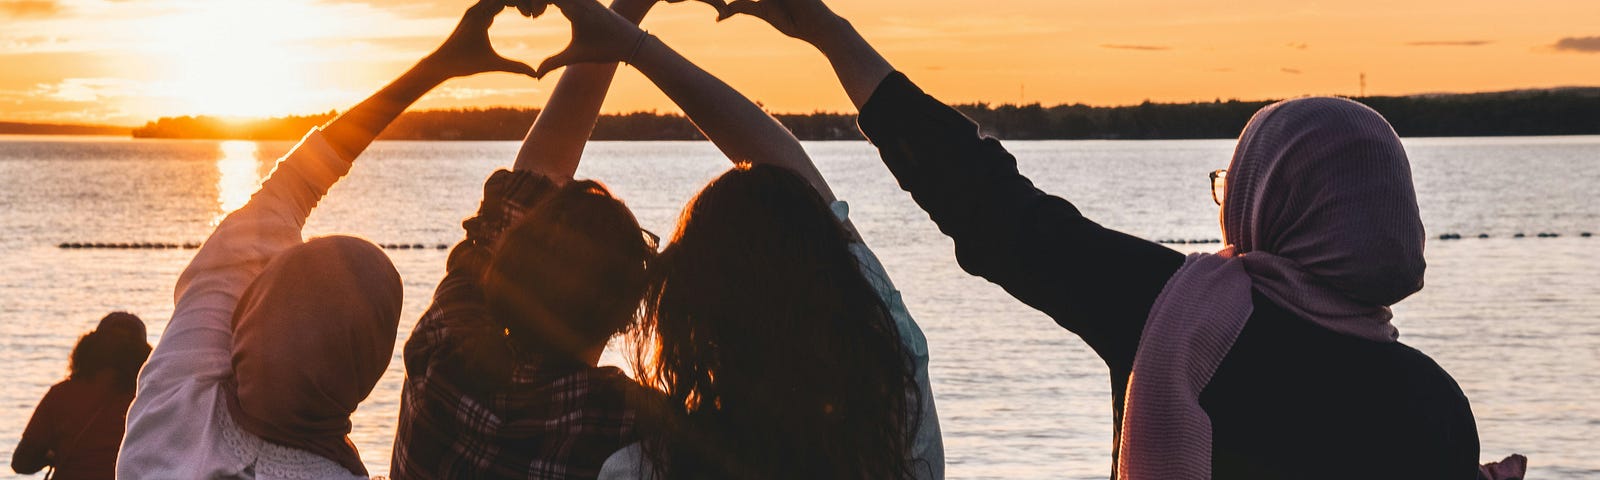 A group of friends sitting by the water embracing them arms and hands with the heart symbol